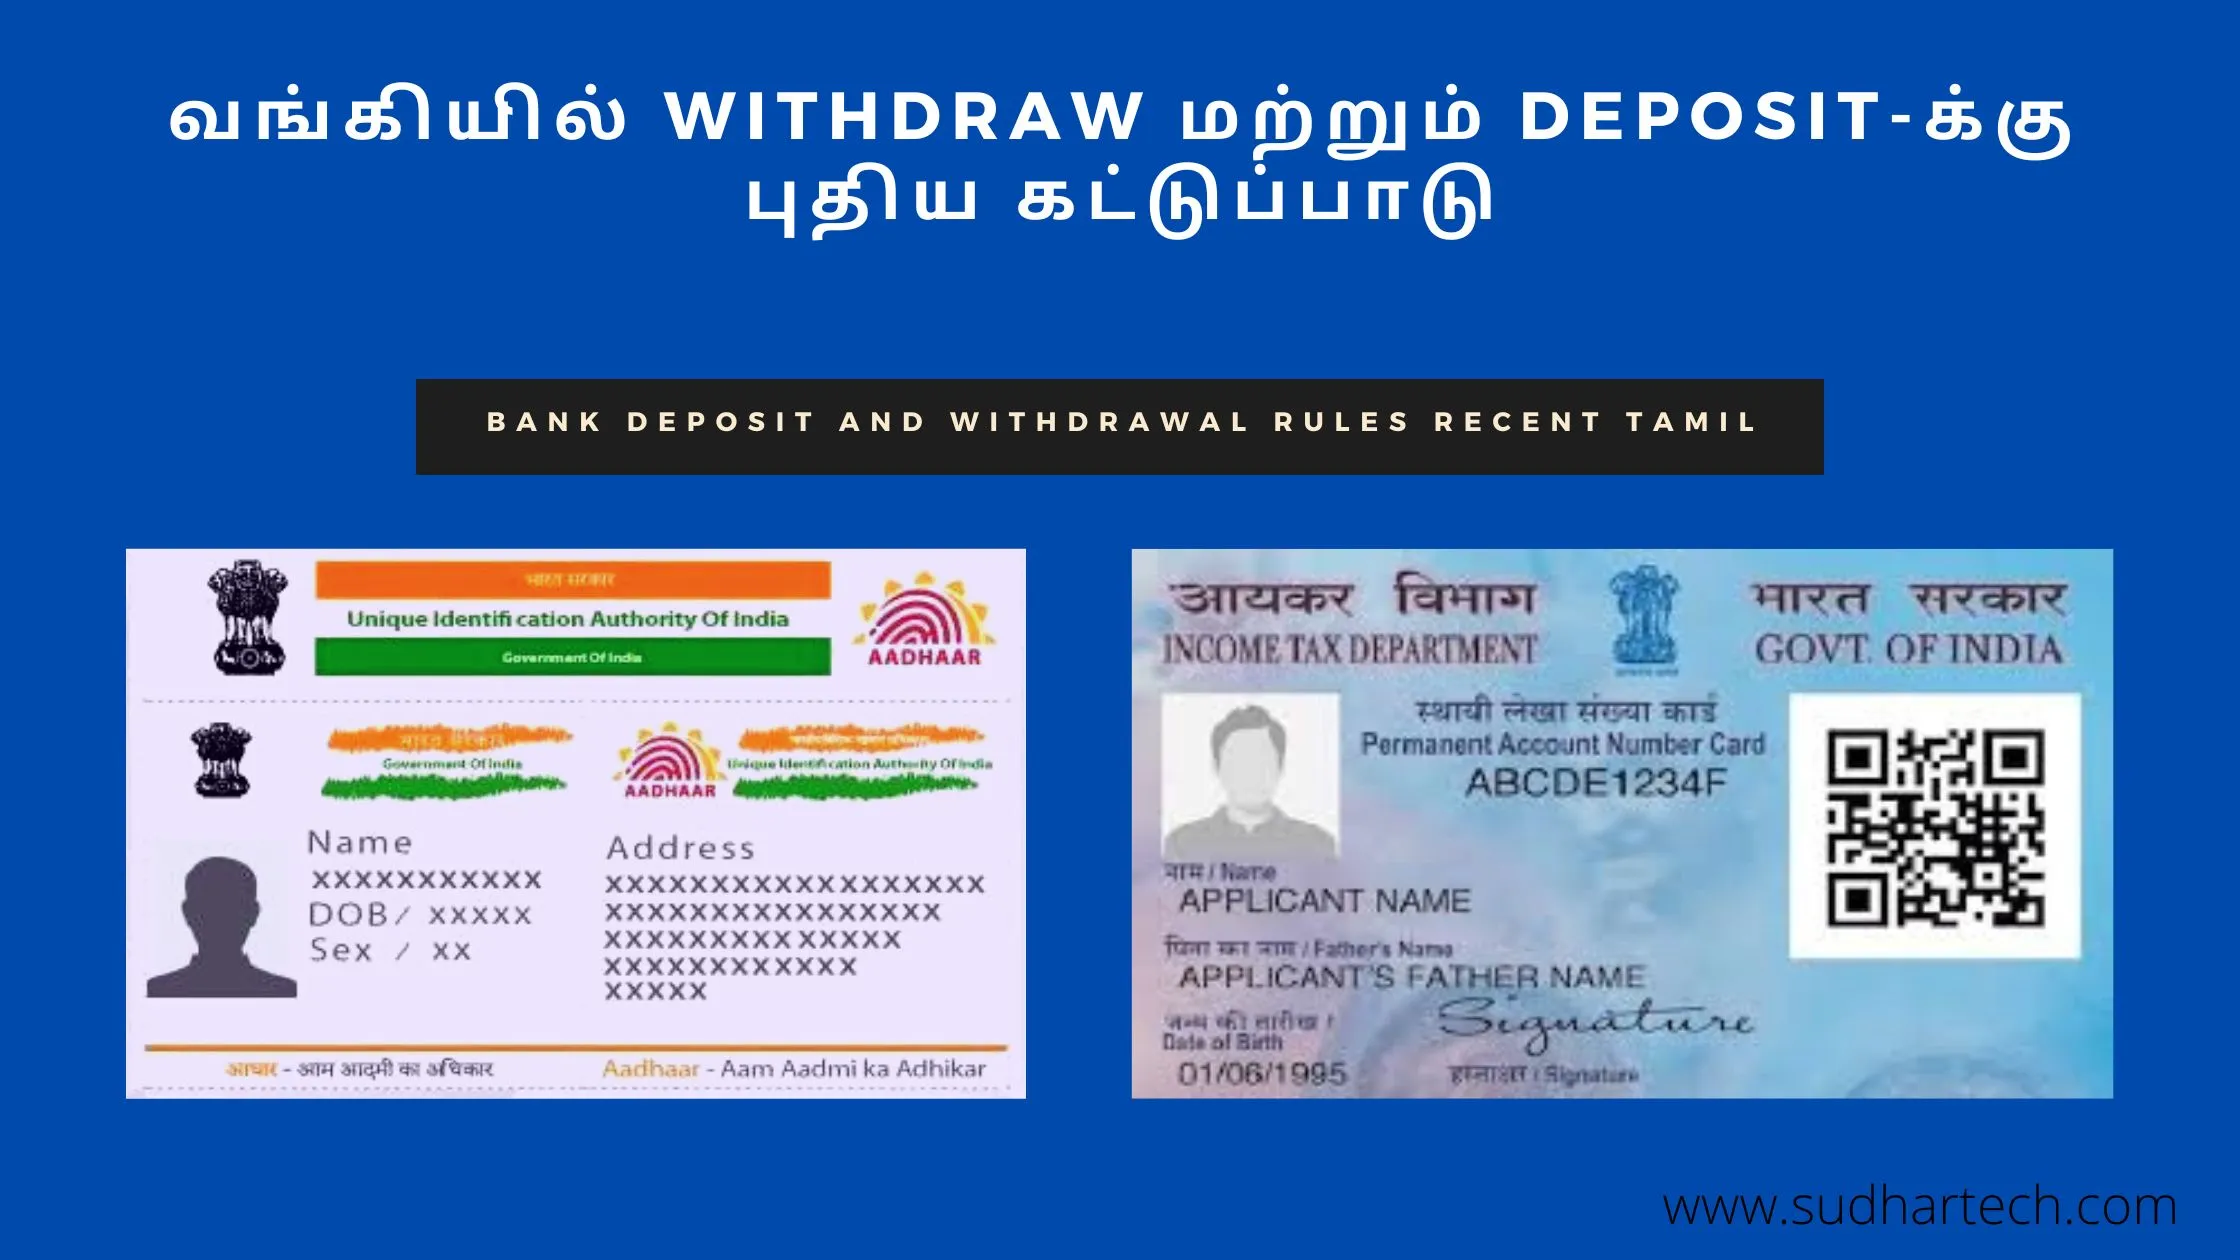 Bank deposit and withdrawal recent rules Tamil